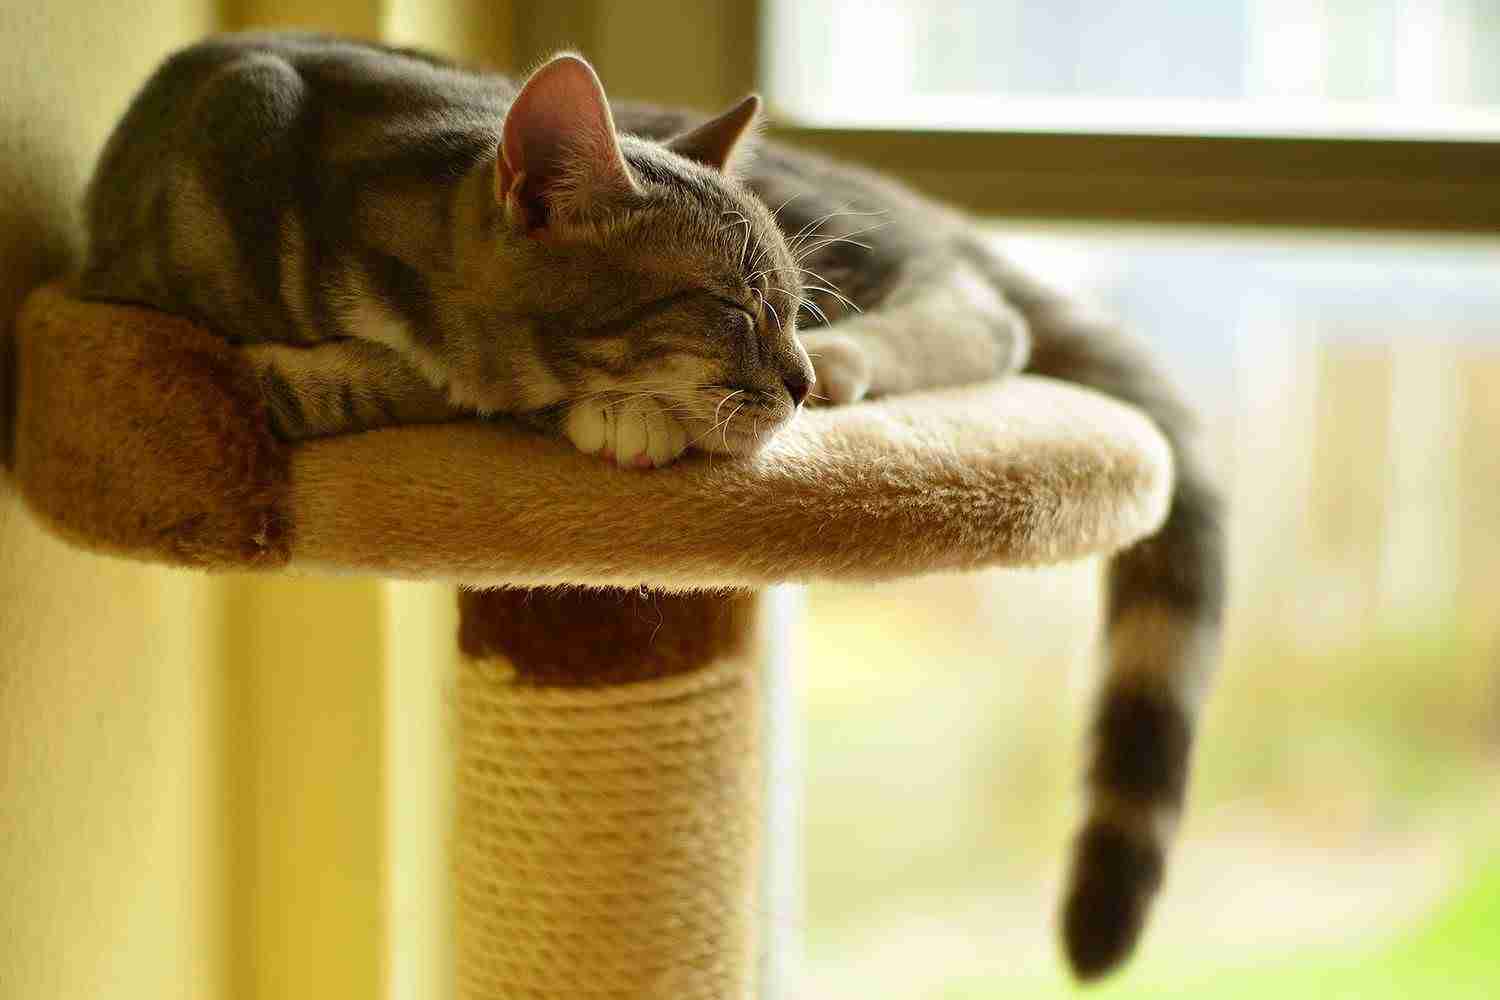 Cats scratching: how to avoid unpleasant surprises